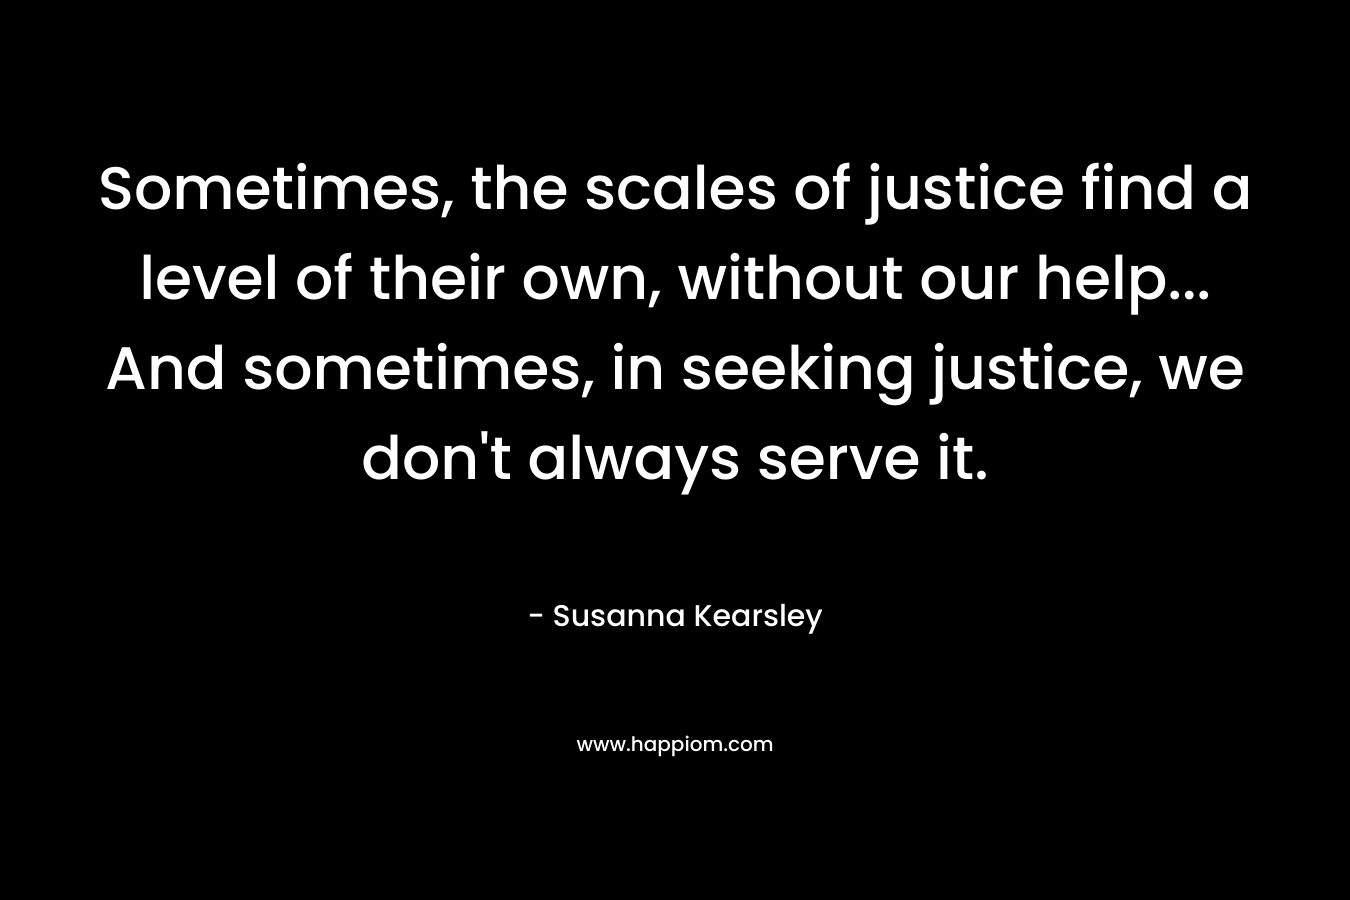 Sometimes, the scales of justice find a level of their own, without our help… And sometimes, in seeking justice, we don’t always serve it. – Susanna Kearsley